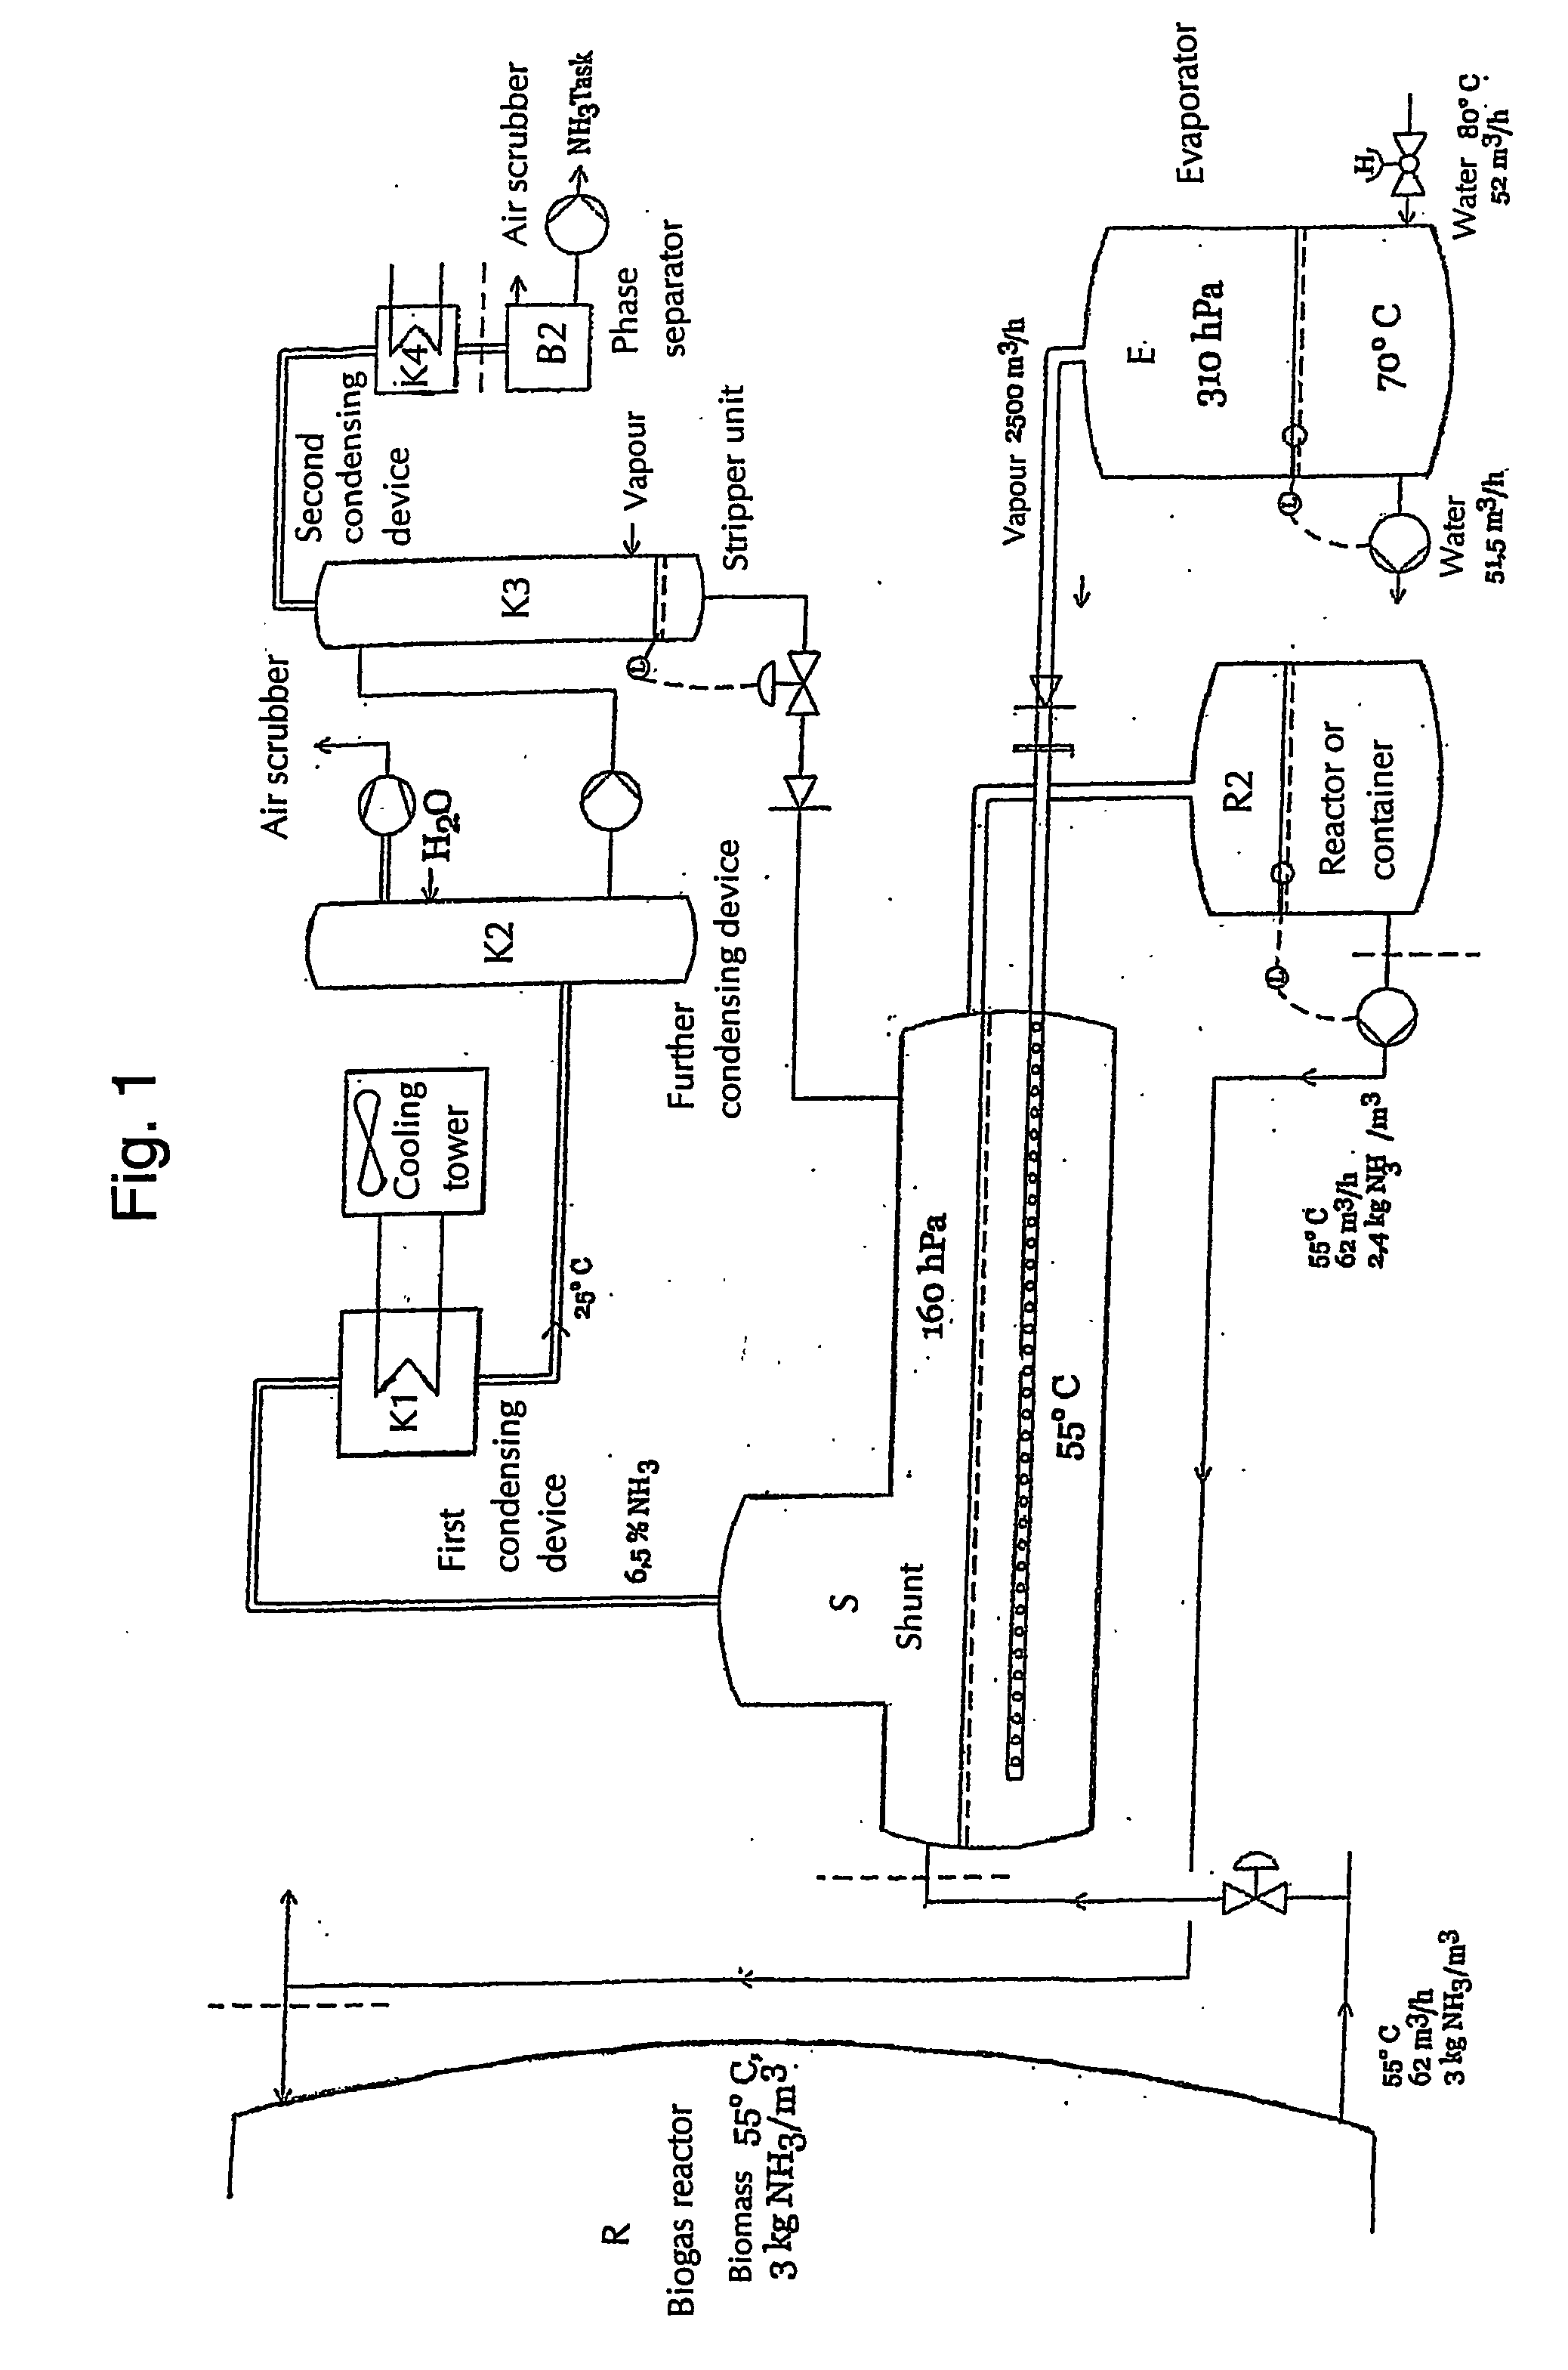 Method and device for stripping ammonia from liquids